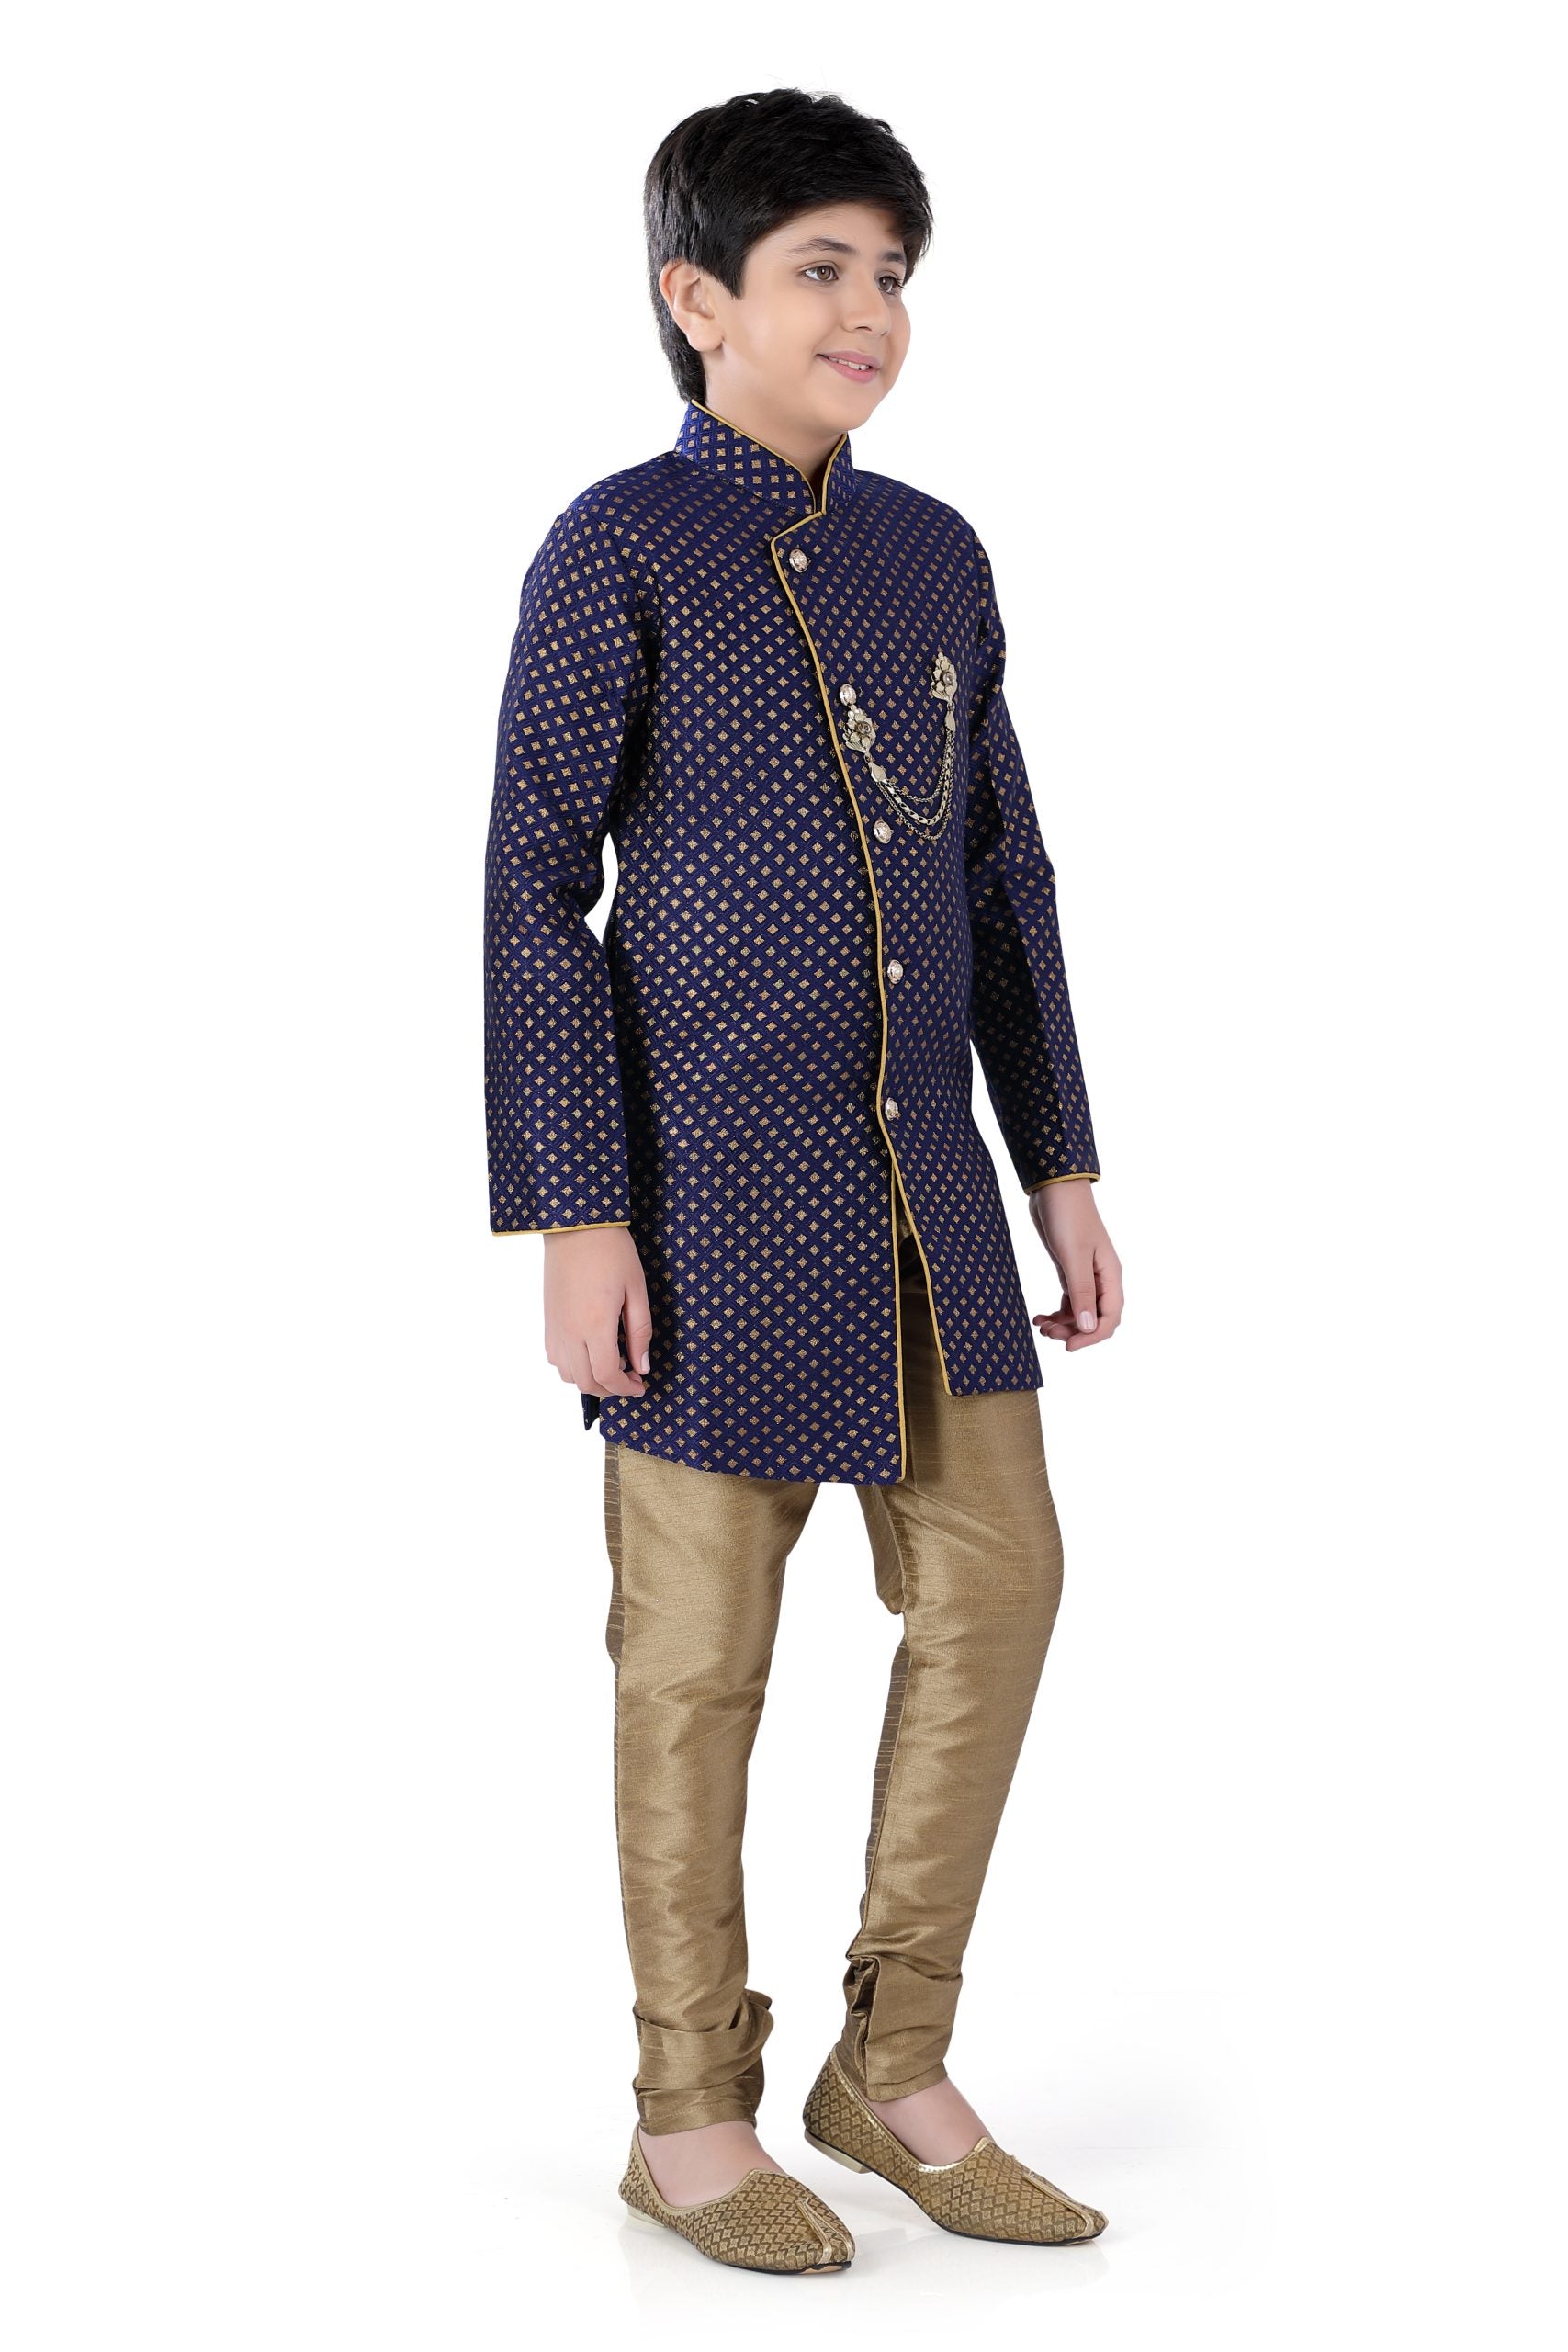 Boys Indo-western Dark Blue with Golden Print and Golden Lower